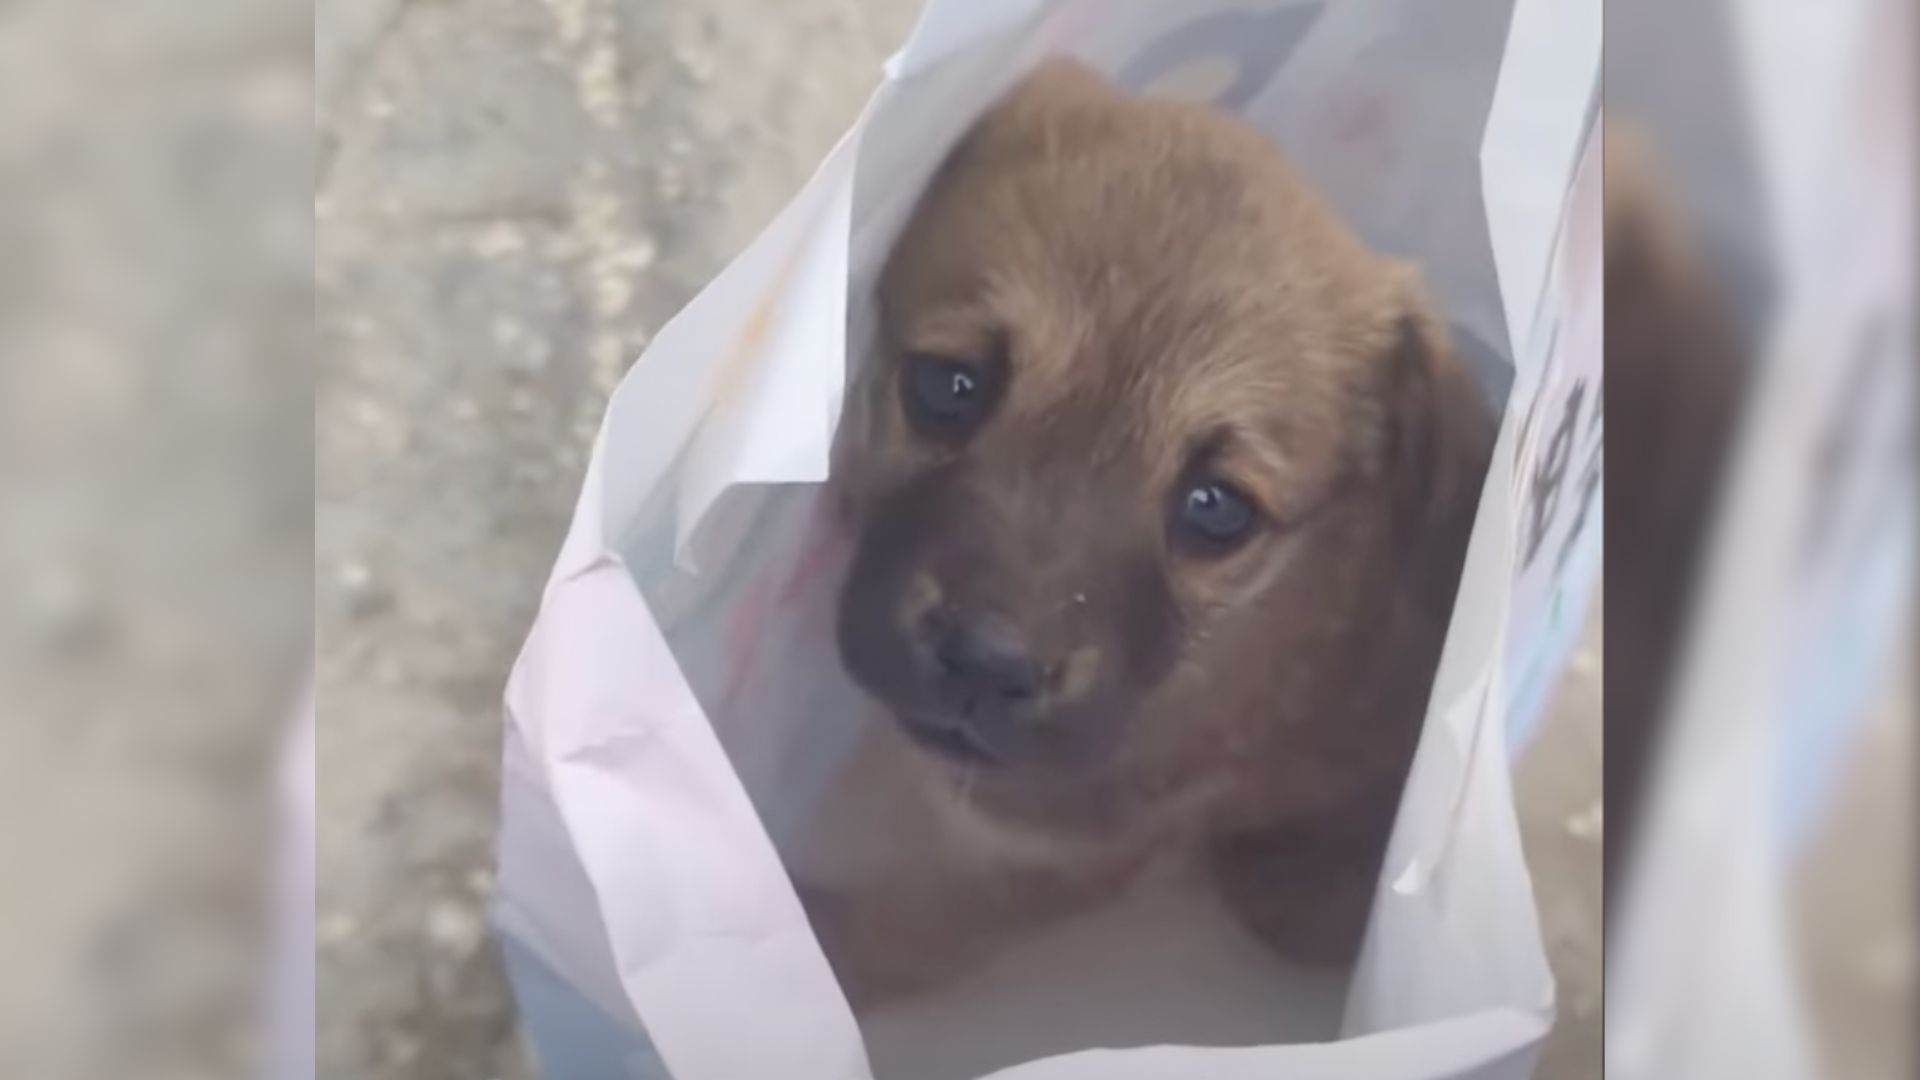 Excavator Operator Saw A Depressed Puppy At His Work And Decided To Change His Life Completely